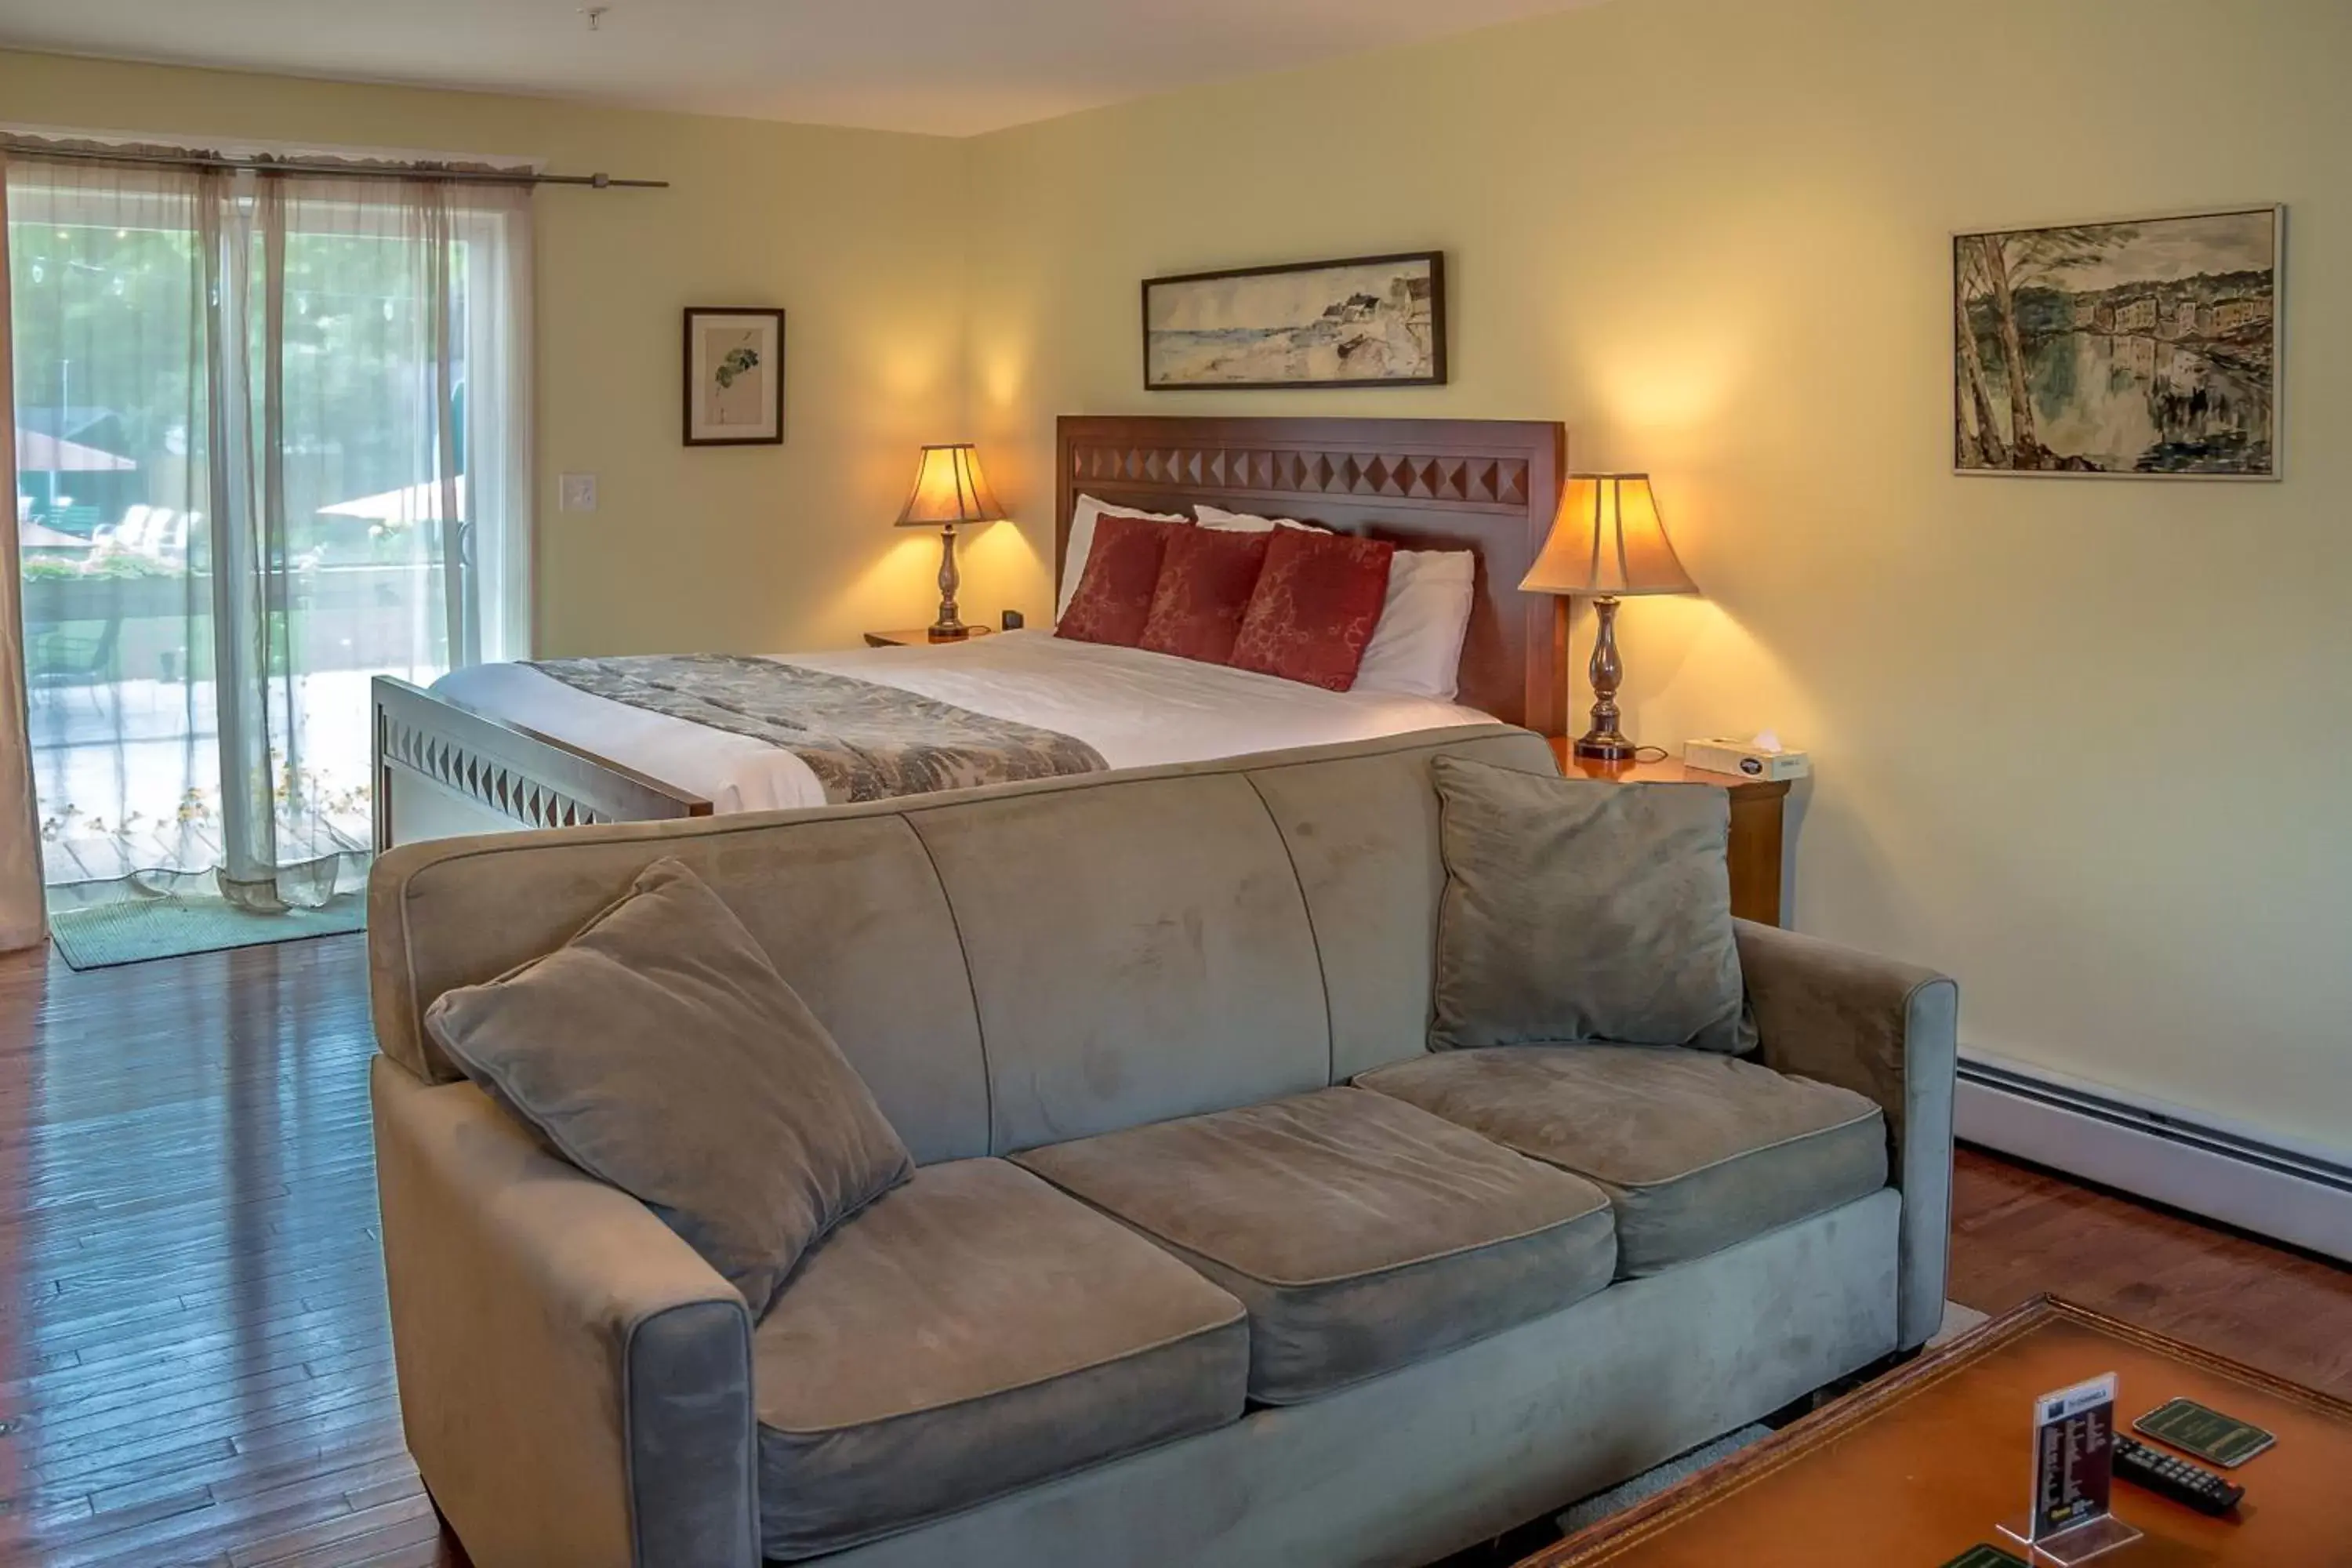 Deluxe King Room with Fireplace in Cranmore Inn and Suites, a North Conway boutique hotel